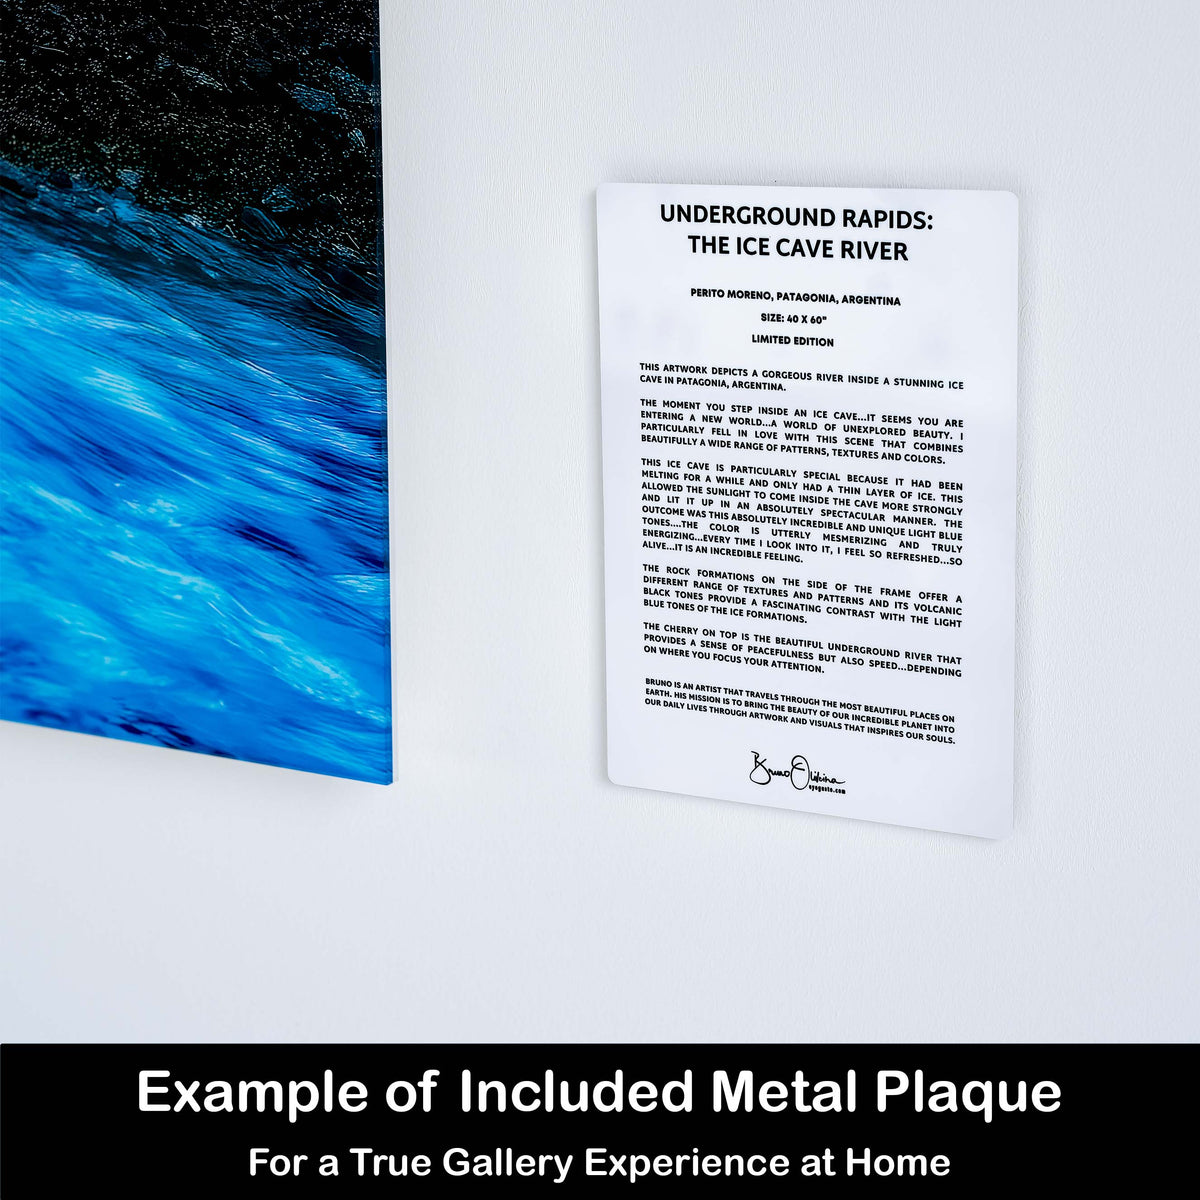 Artwork Story - METAL PLAQUE for a True Gallery Experience at Home